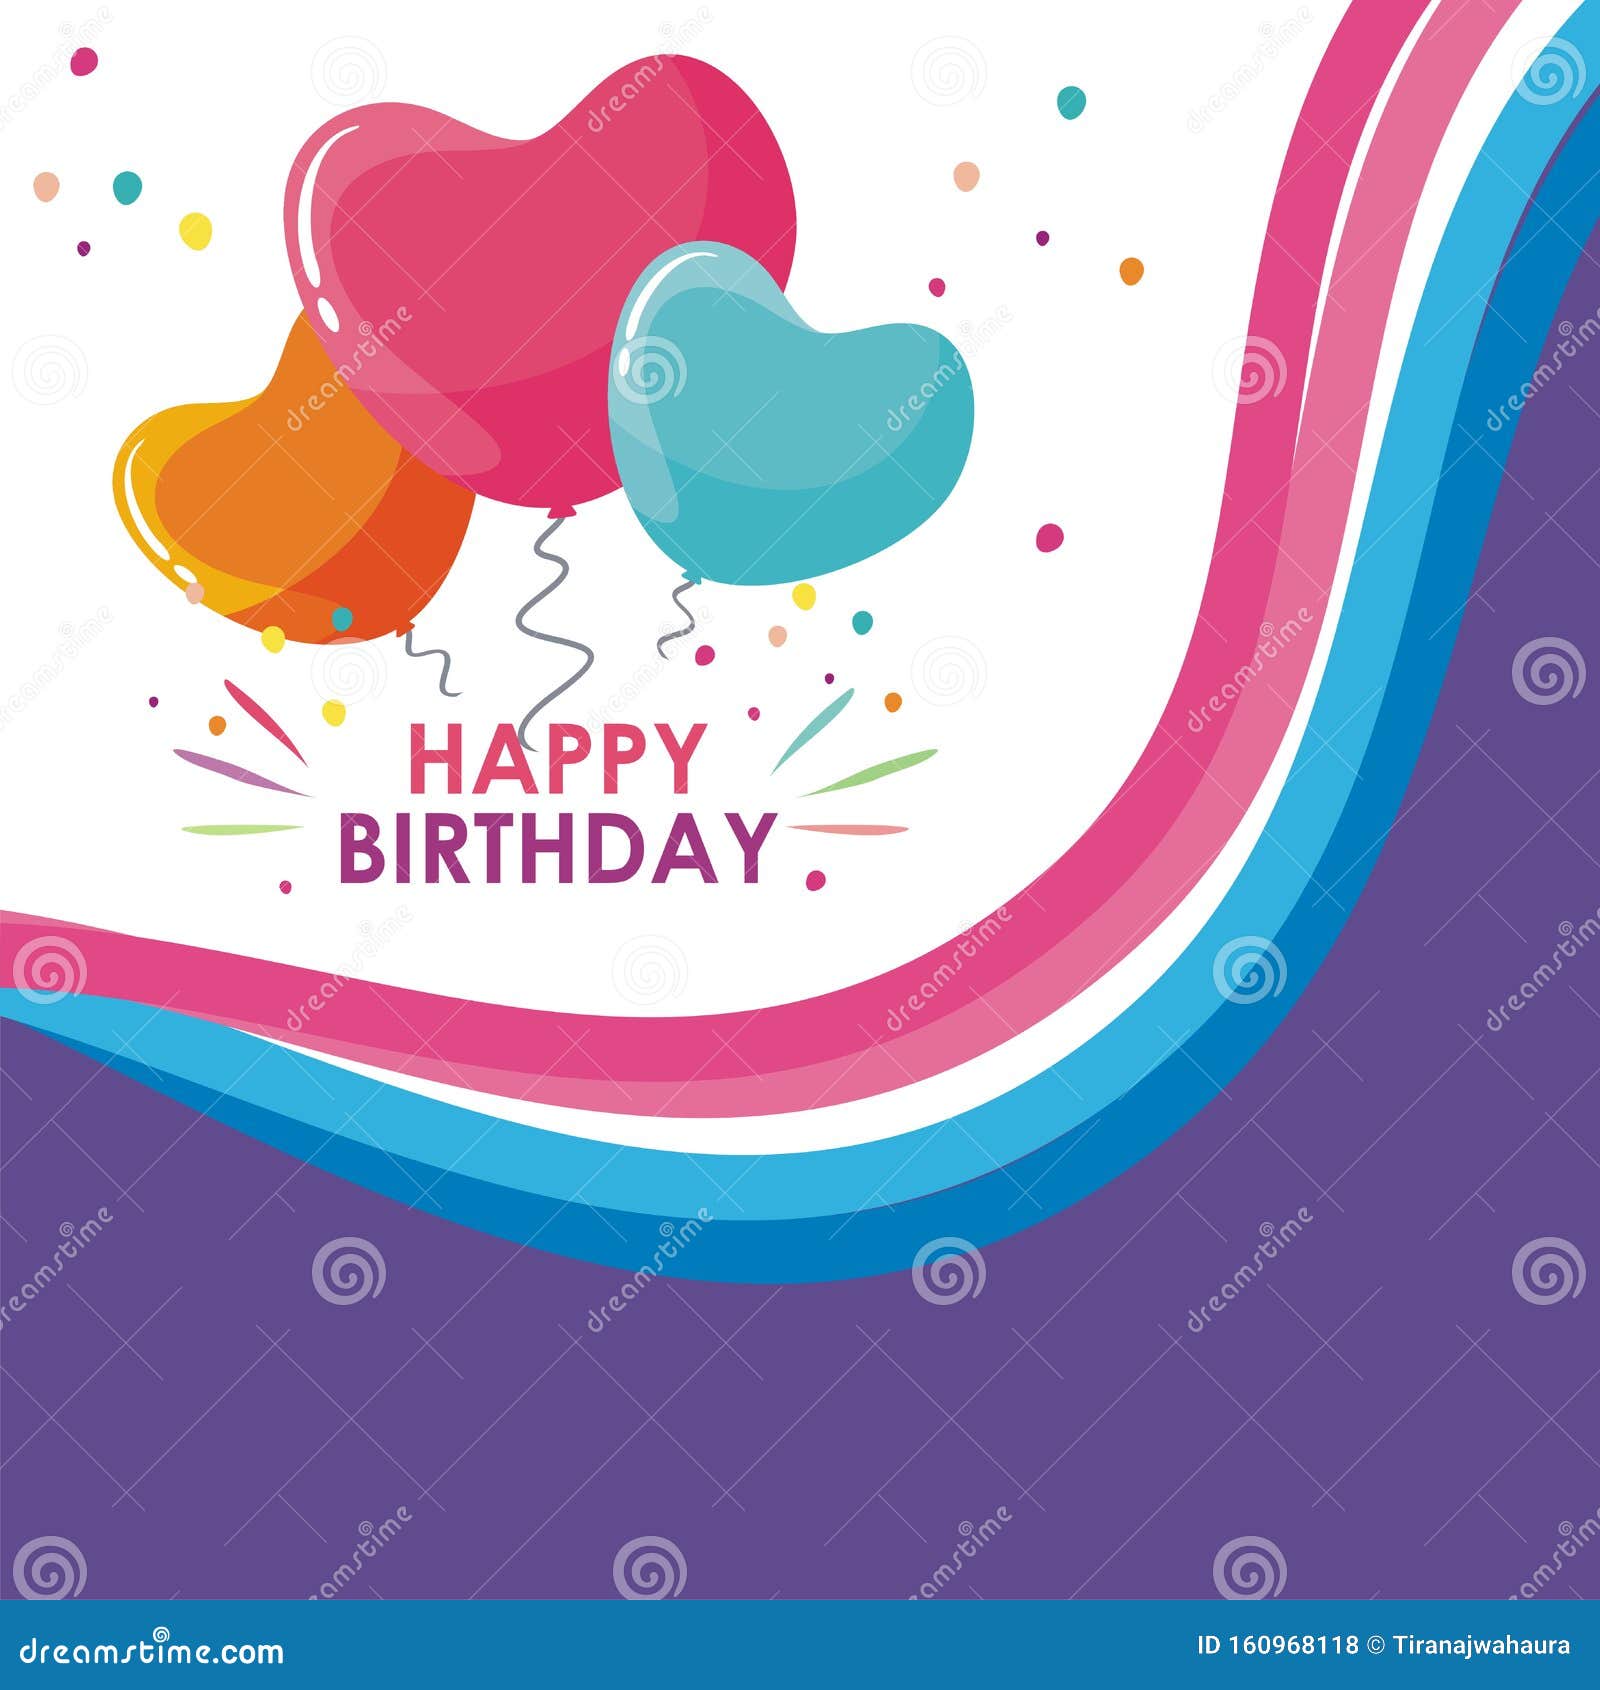 Happy Birthday Card Template Design With Trendy And Cute Design Stock Vector Illustration Of Birth Baloon